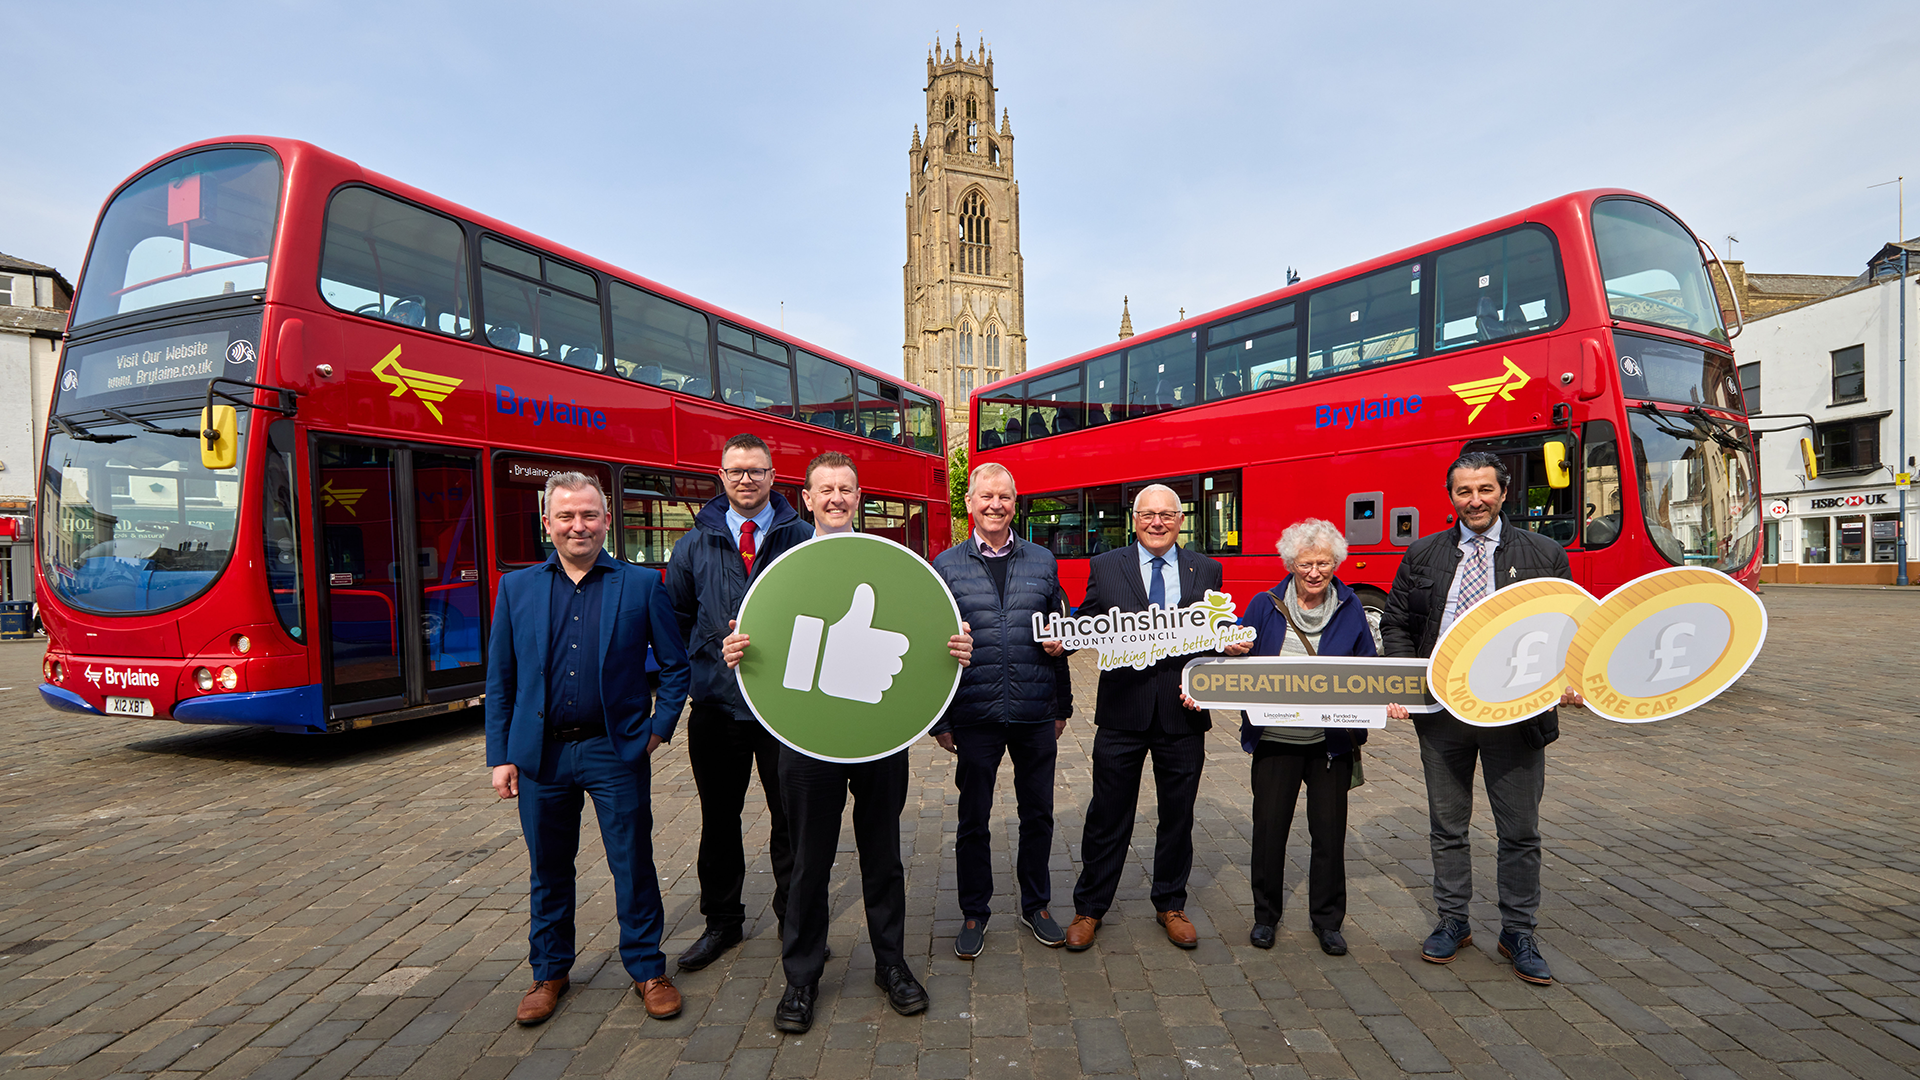 Image - from left to right:  
  
David Walker: Brylaine operations controller 
Michael Short: bus driver 
Ben Spencer: Bus driver 
Councillor Mike Brookes 
Councillor Paul Skinner 
Councillor Alison Austin 
Councillor Anto Dani